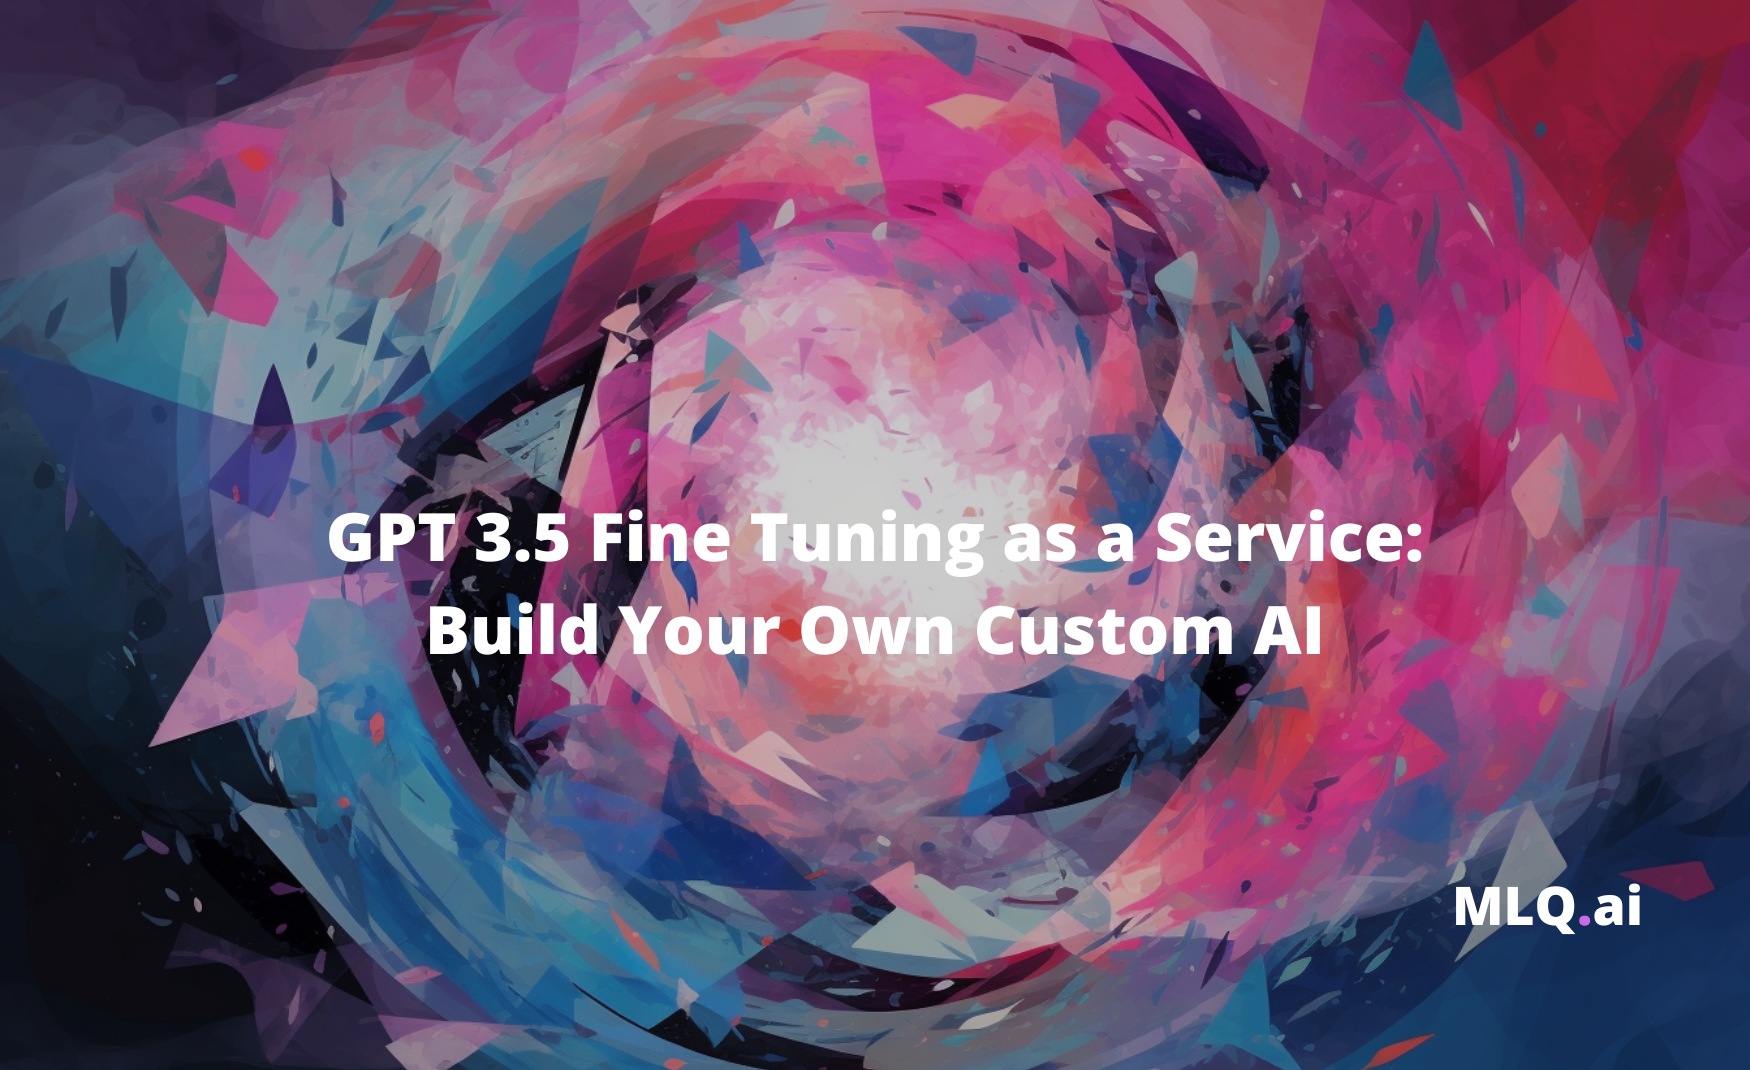 GPT Fine Tuning as a Service: Build Your Own Custom AI post image